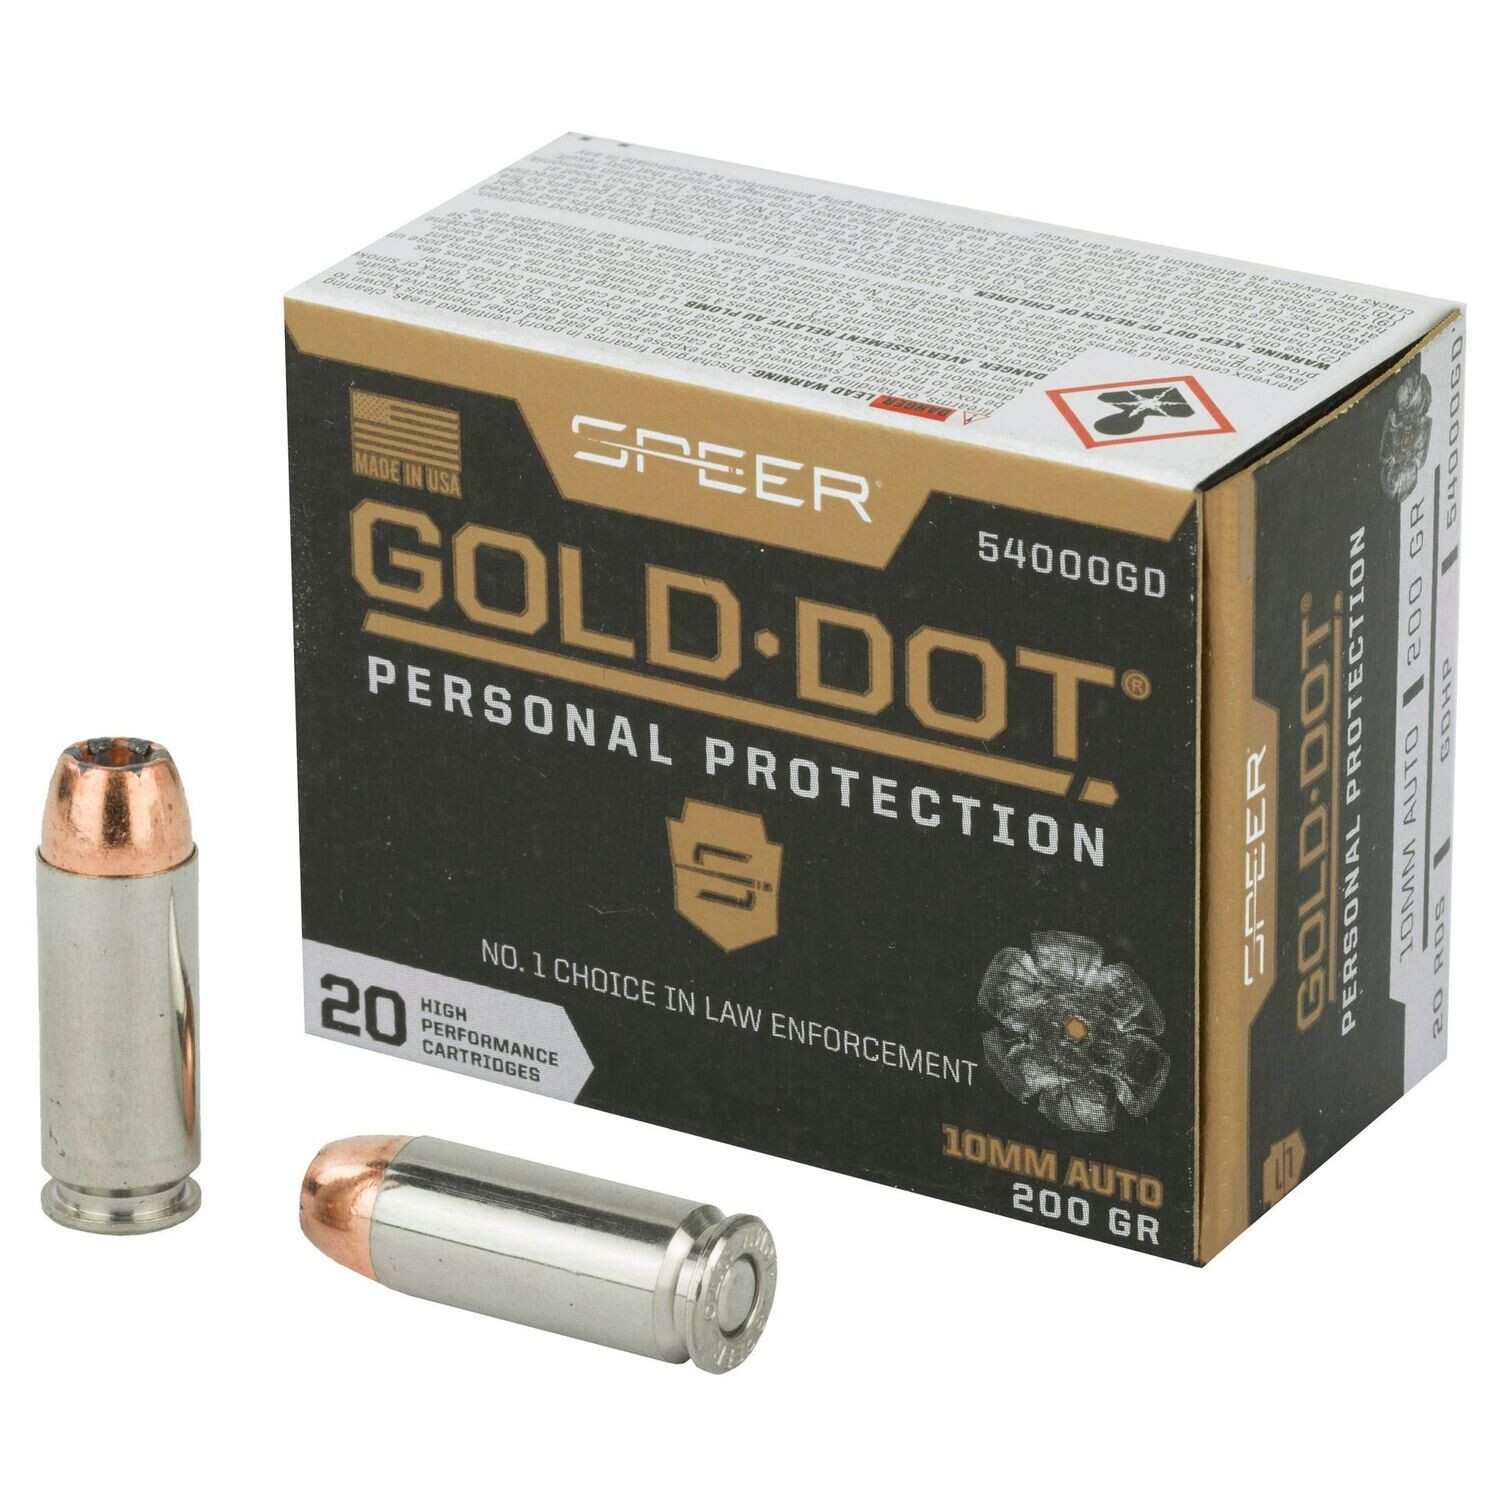 Speer Ammunition, Speer Gold Dot, Personal Protection, 10MM, 200 Grain, Hollow Point, 20 Round Box